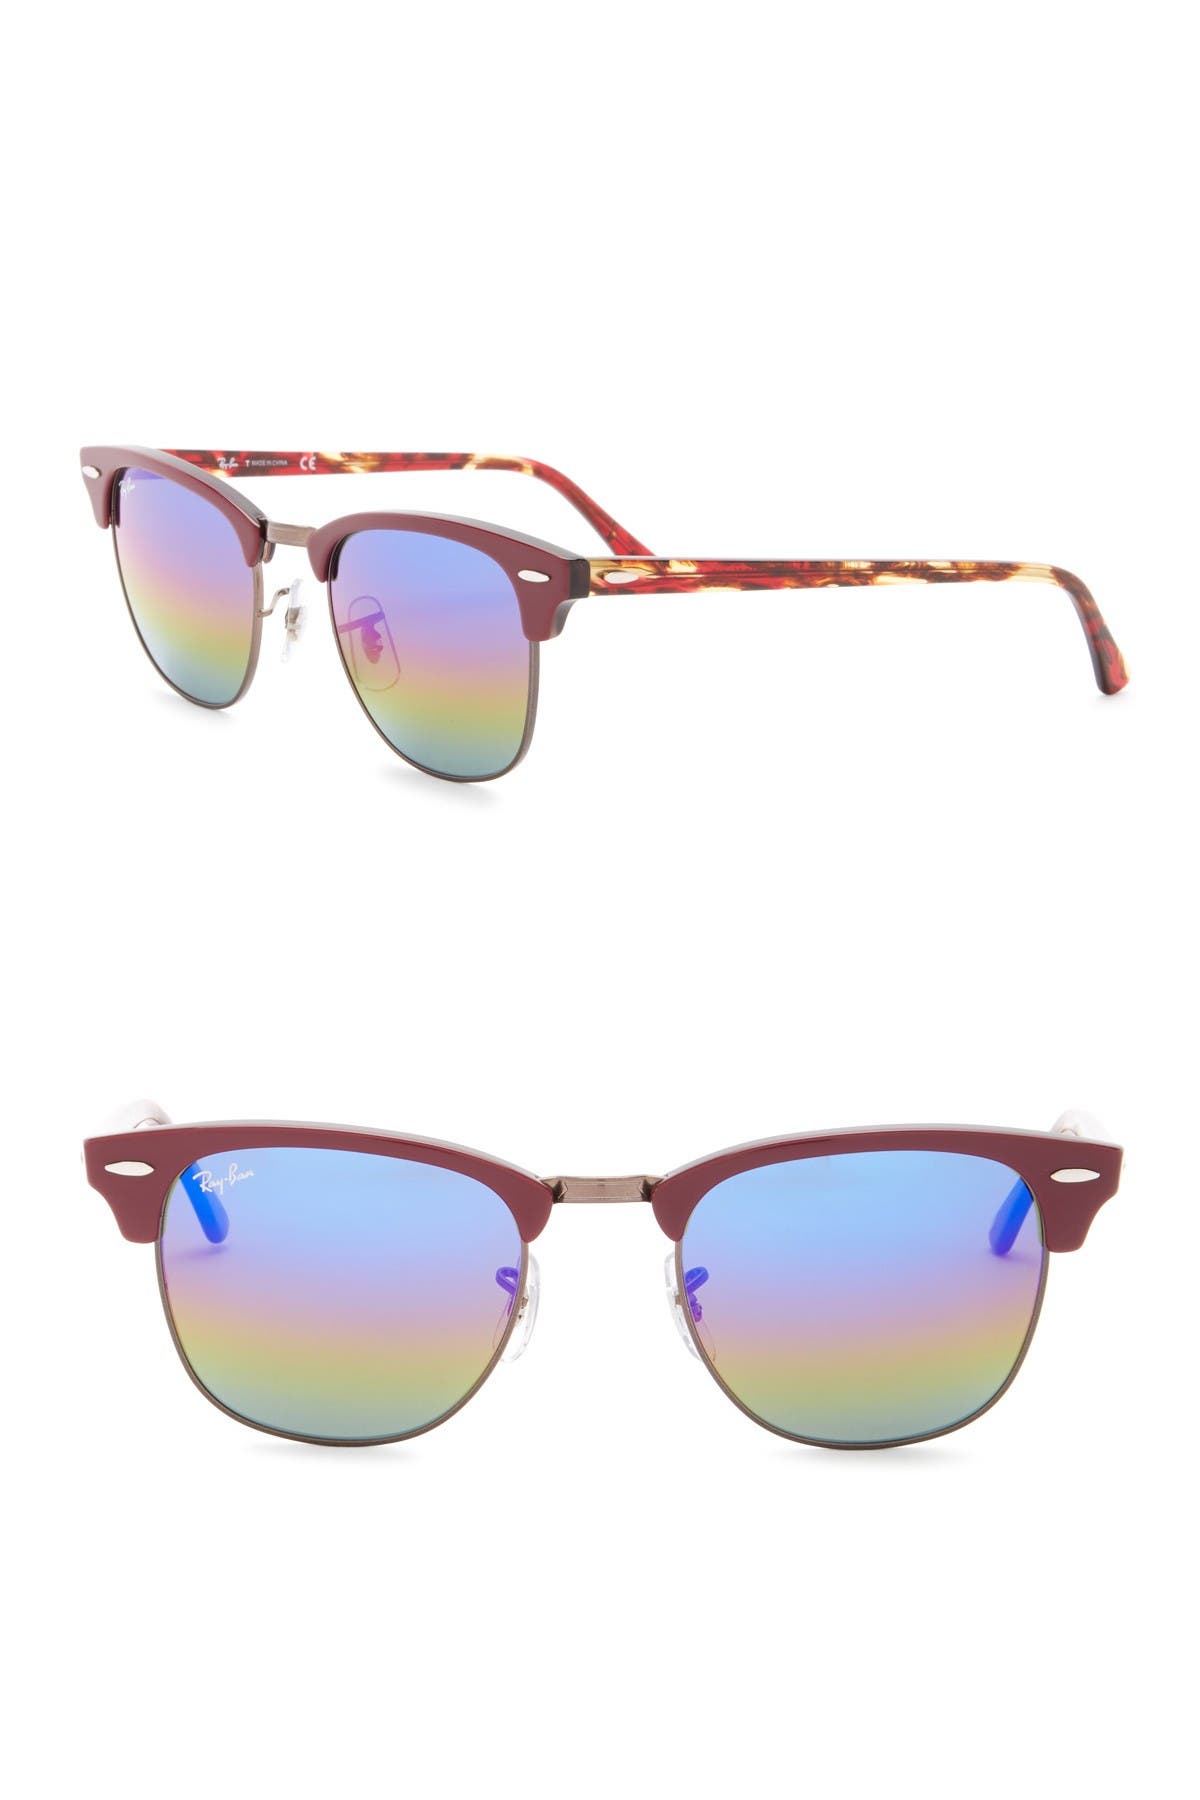 Ray Ban 51mm Clubmaster Sunglasses Nordstrom Rack